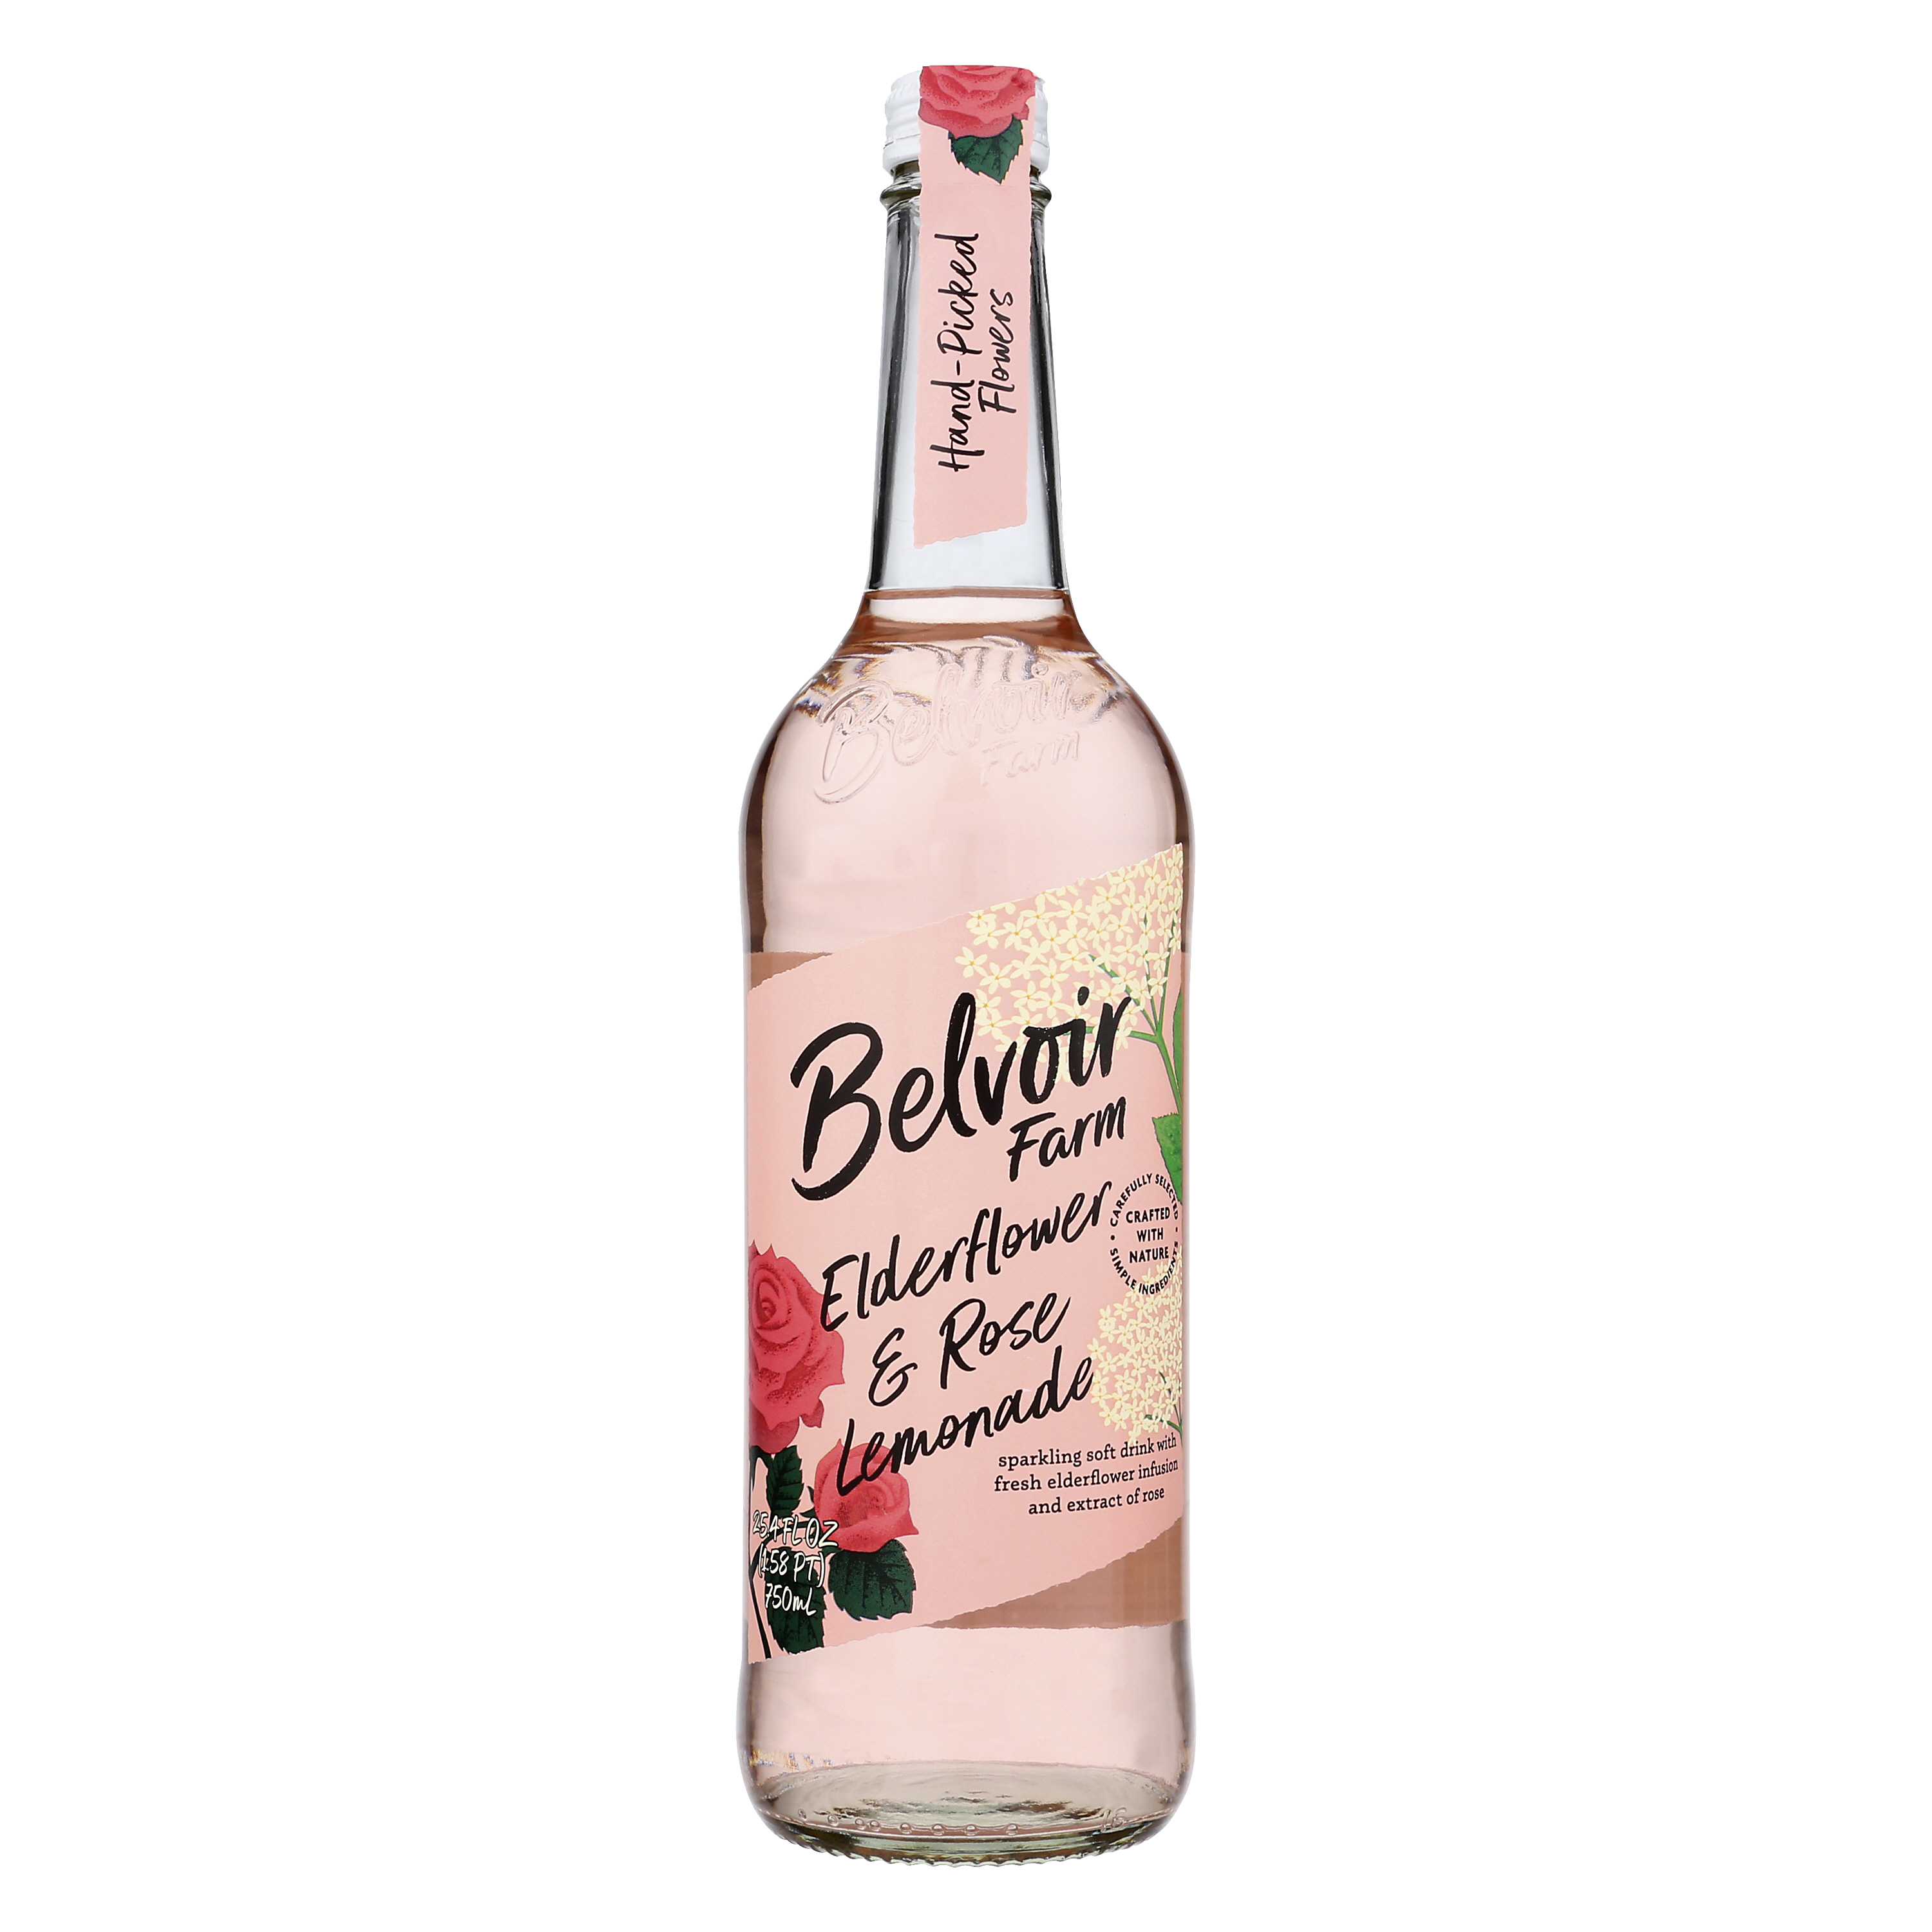 We’re excited to share that Belvoir Fruit Farms Elderflower and Rose was featured on a TODAY Show Valentine’s Day segment!